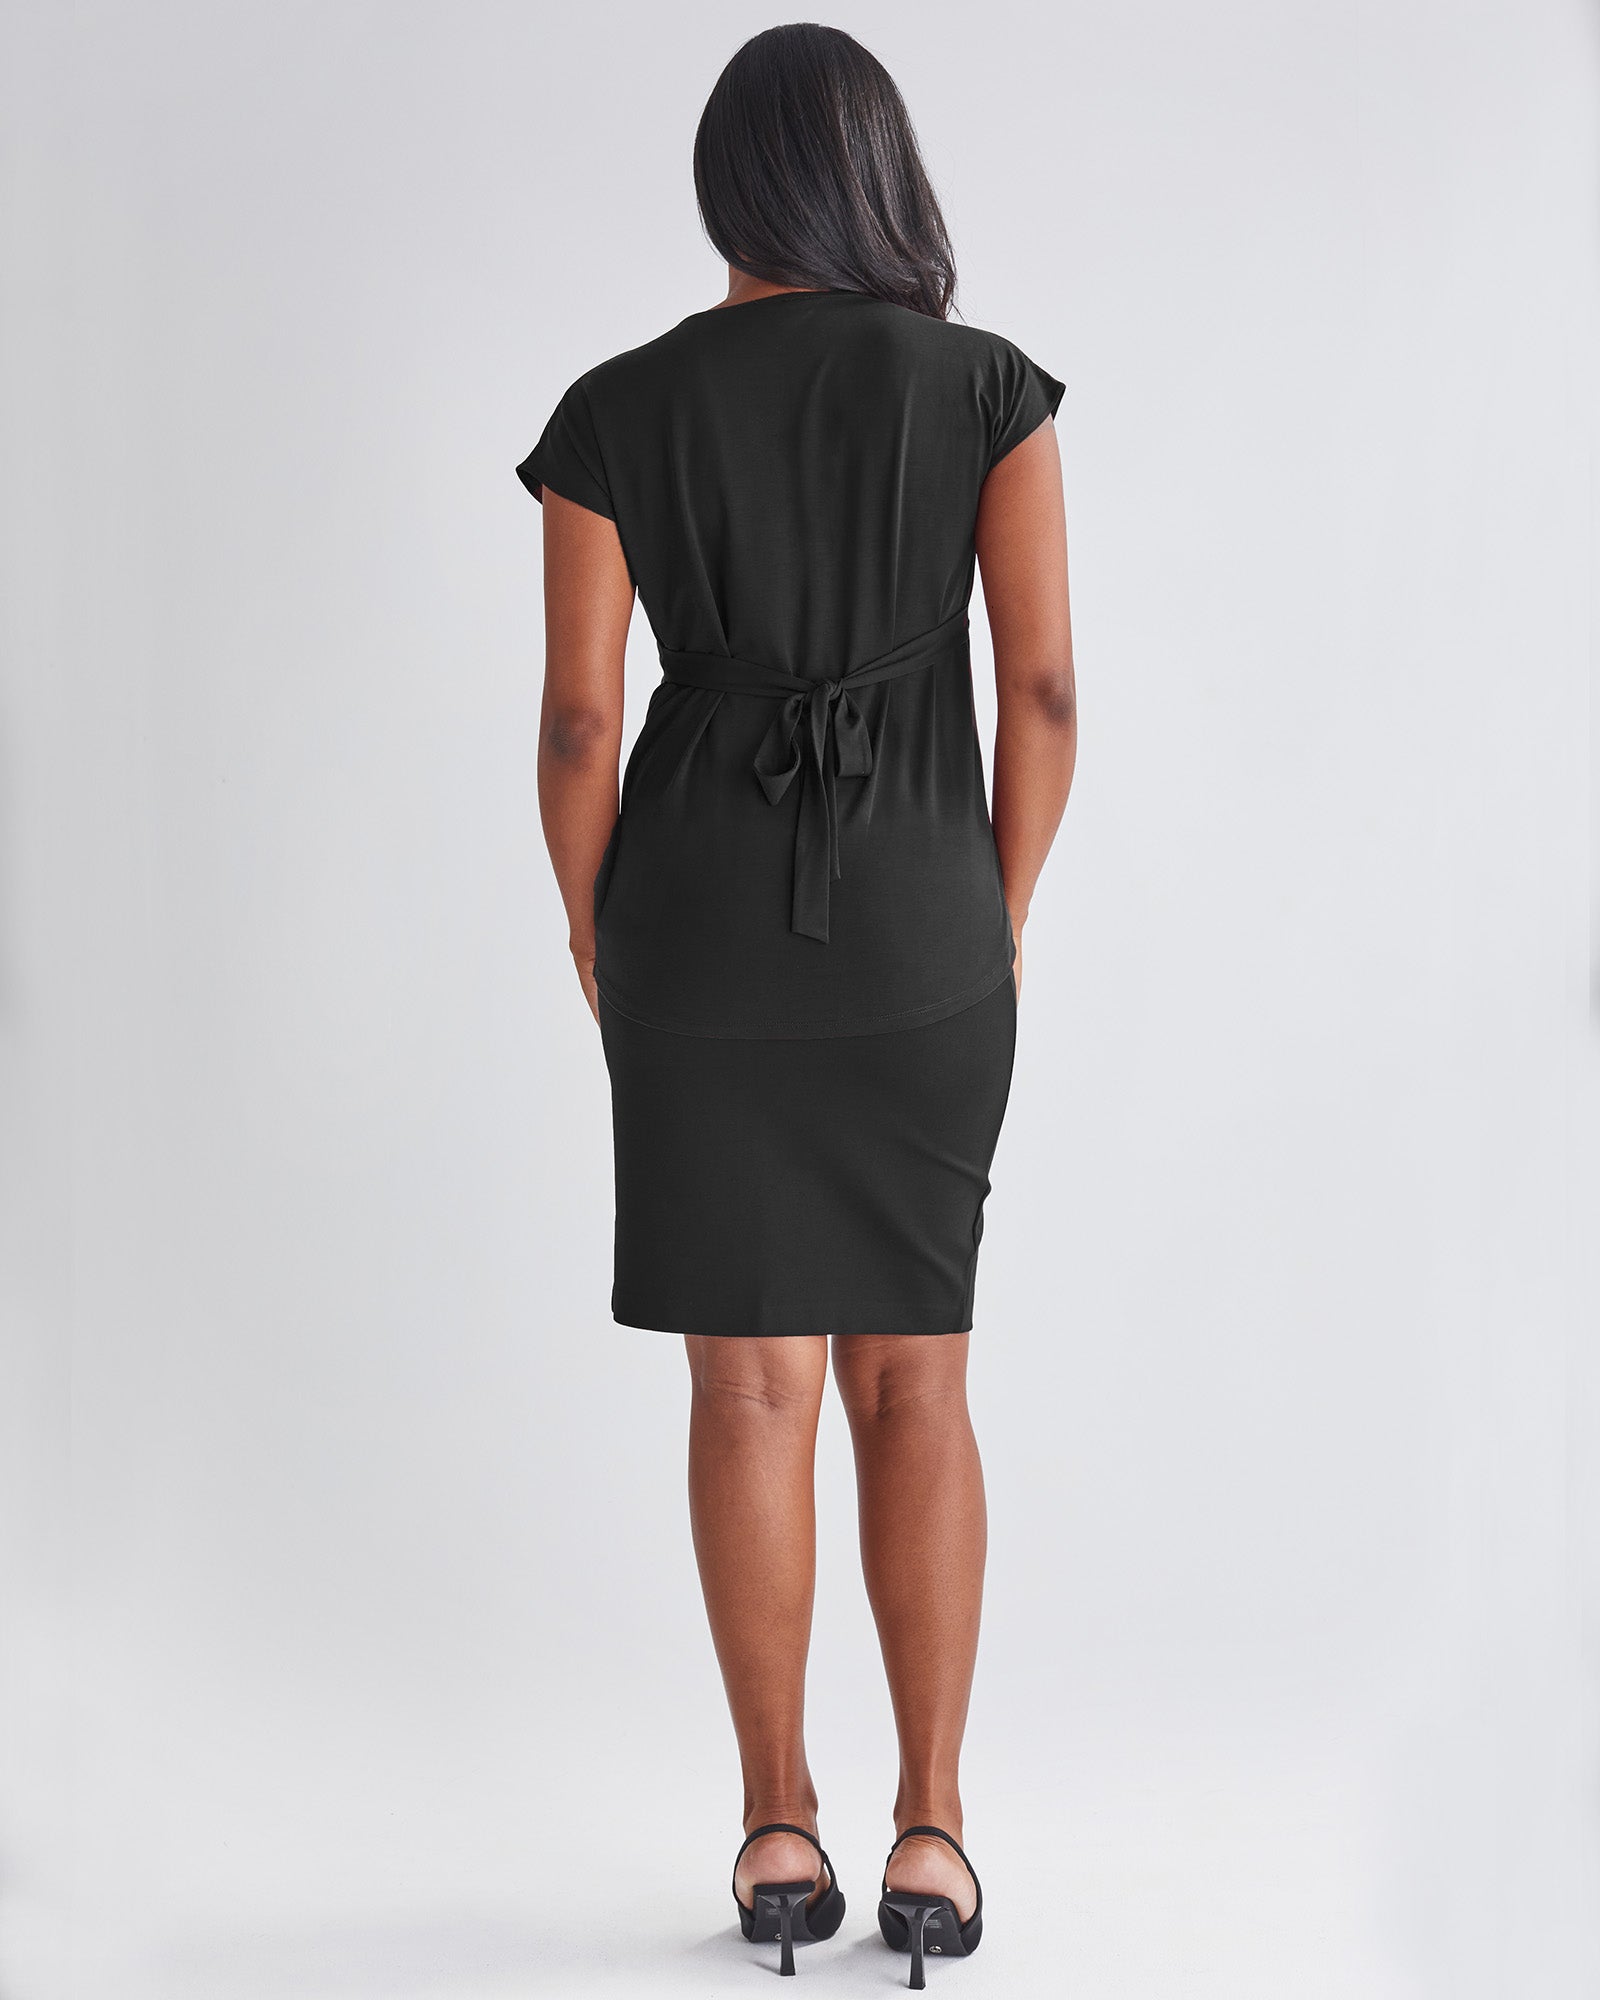 Back view-Nursing friendly cross Over style Stretchy, no-iron fabric Versatile waist belt from Angel Maternity